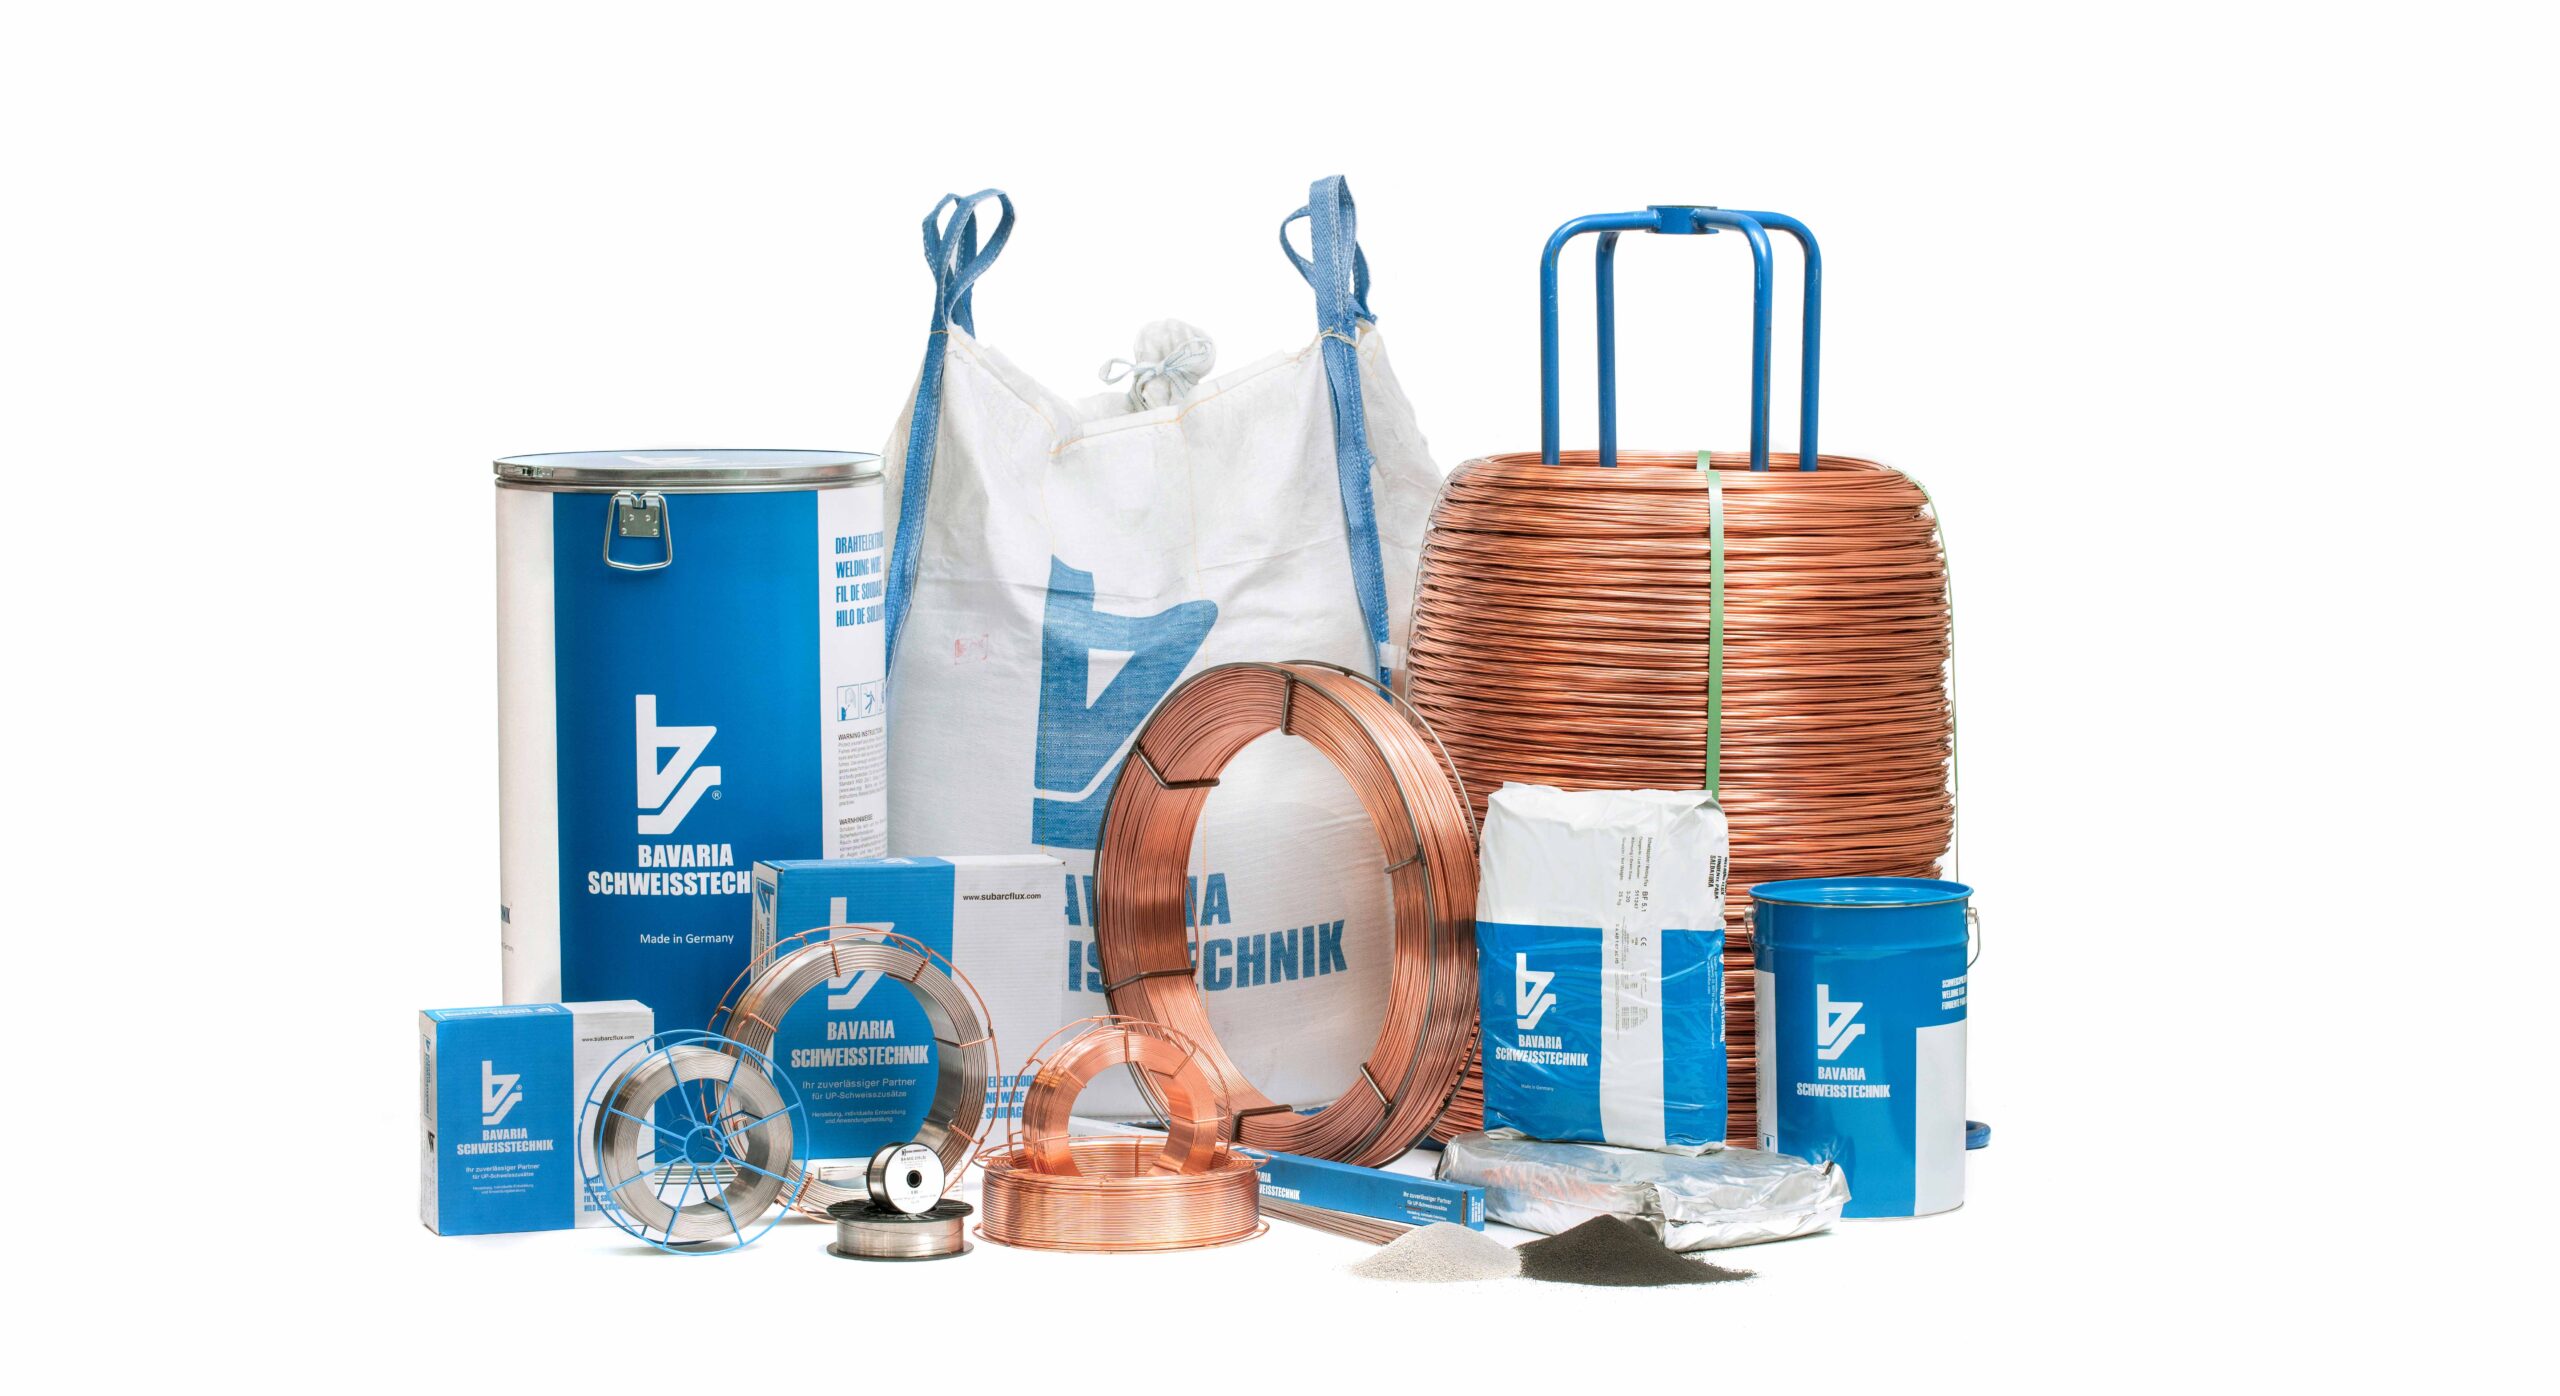 The image shows our customer's product overview, consisting of welding flux and wires, which were created as part of the product shoot that we implemented as an agency.